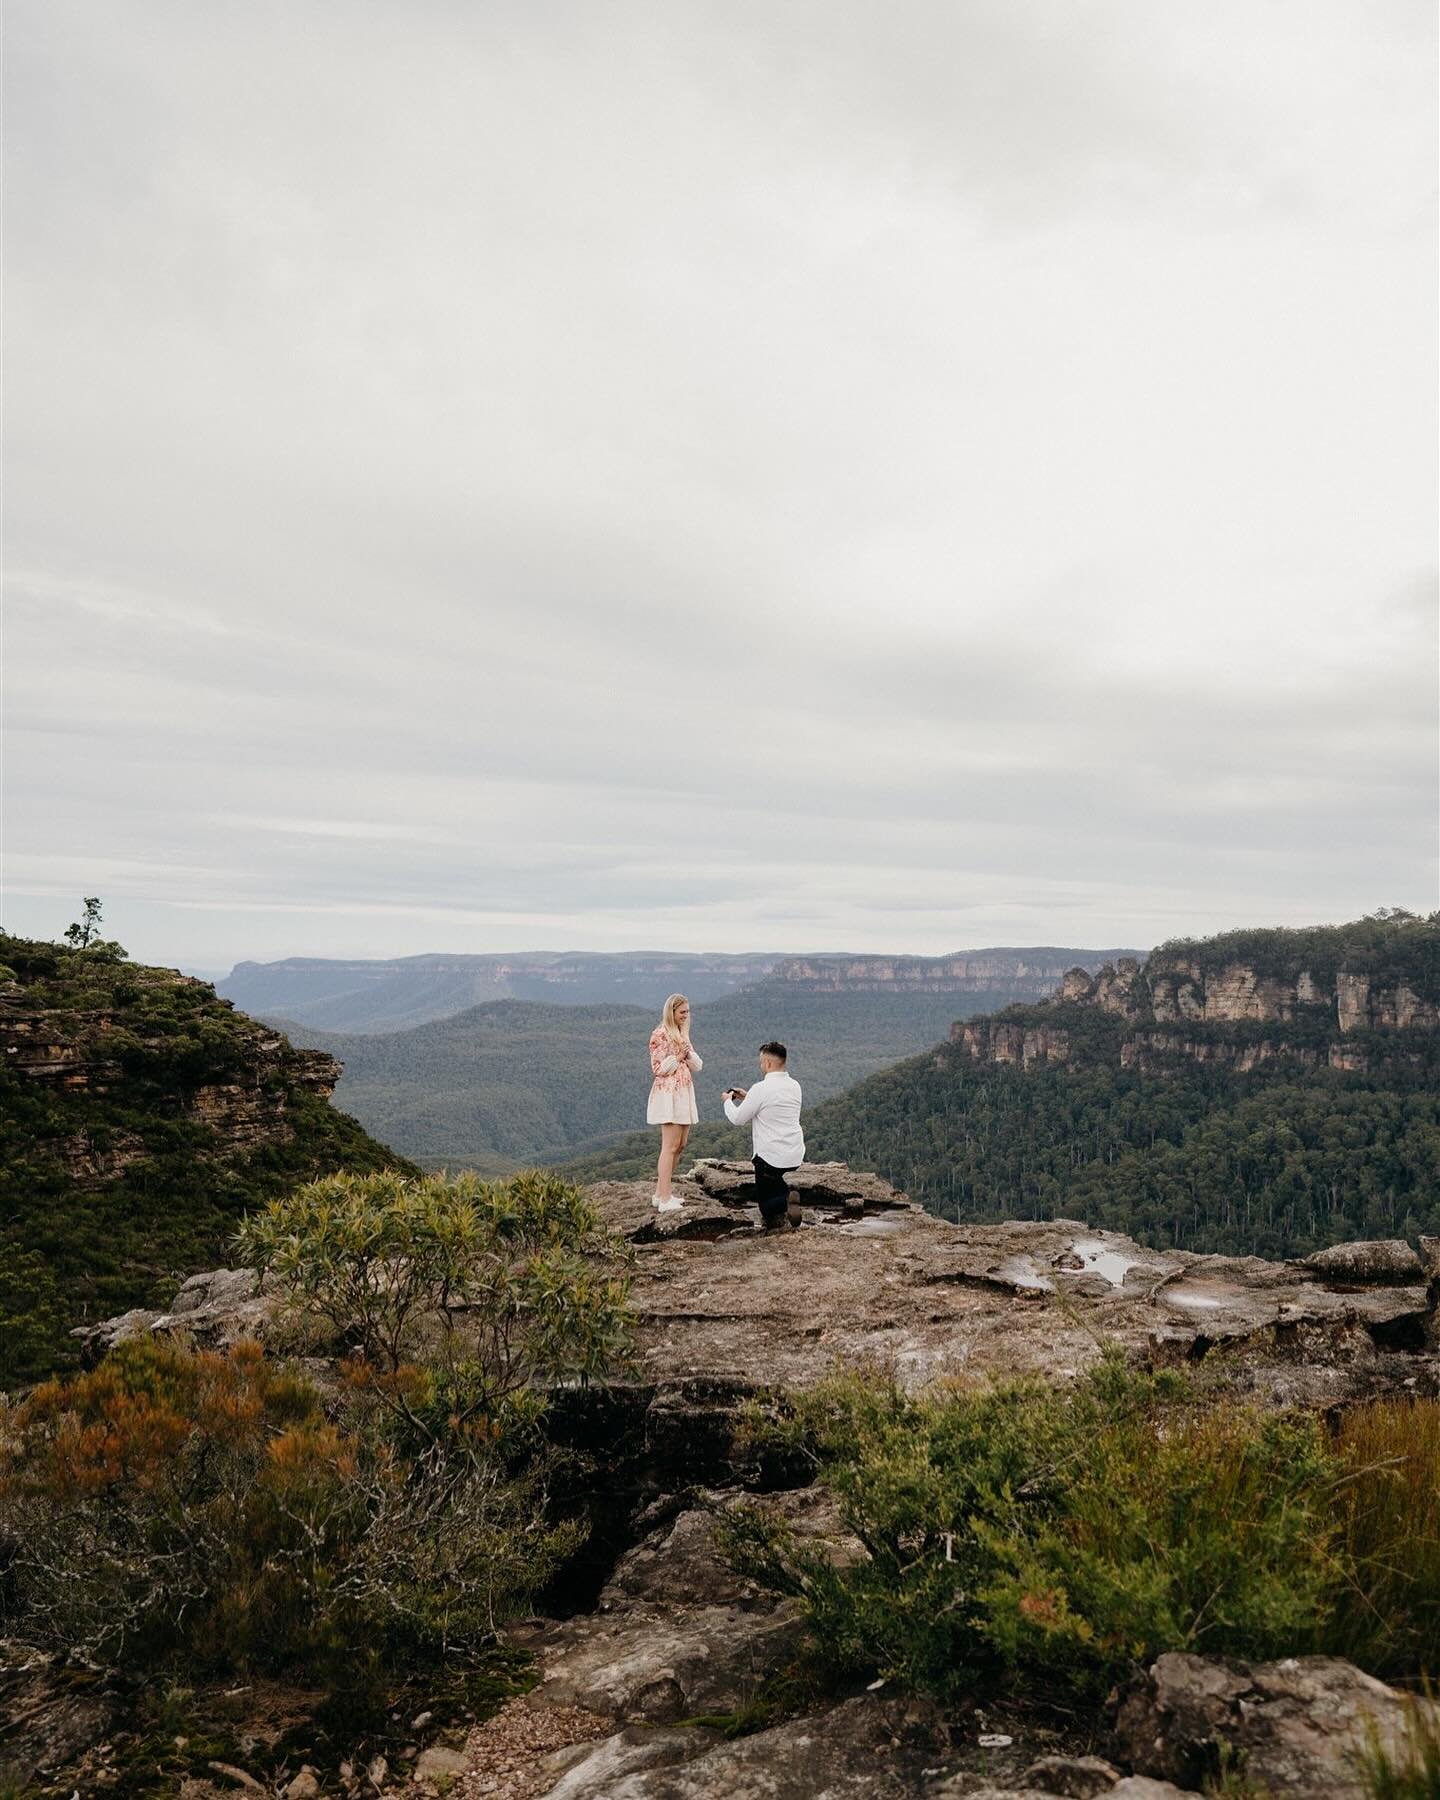 Proposal with a view! Congrats G + D 💍
What an amazing surprise proposal for these two love birds. 

Thanks for having us! 🙏🏼

#proposal #engaged #surpriseproposal #surprise #shesaidyes #proposalideas #proposalwithaview #sydneyweddingphotographer 